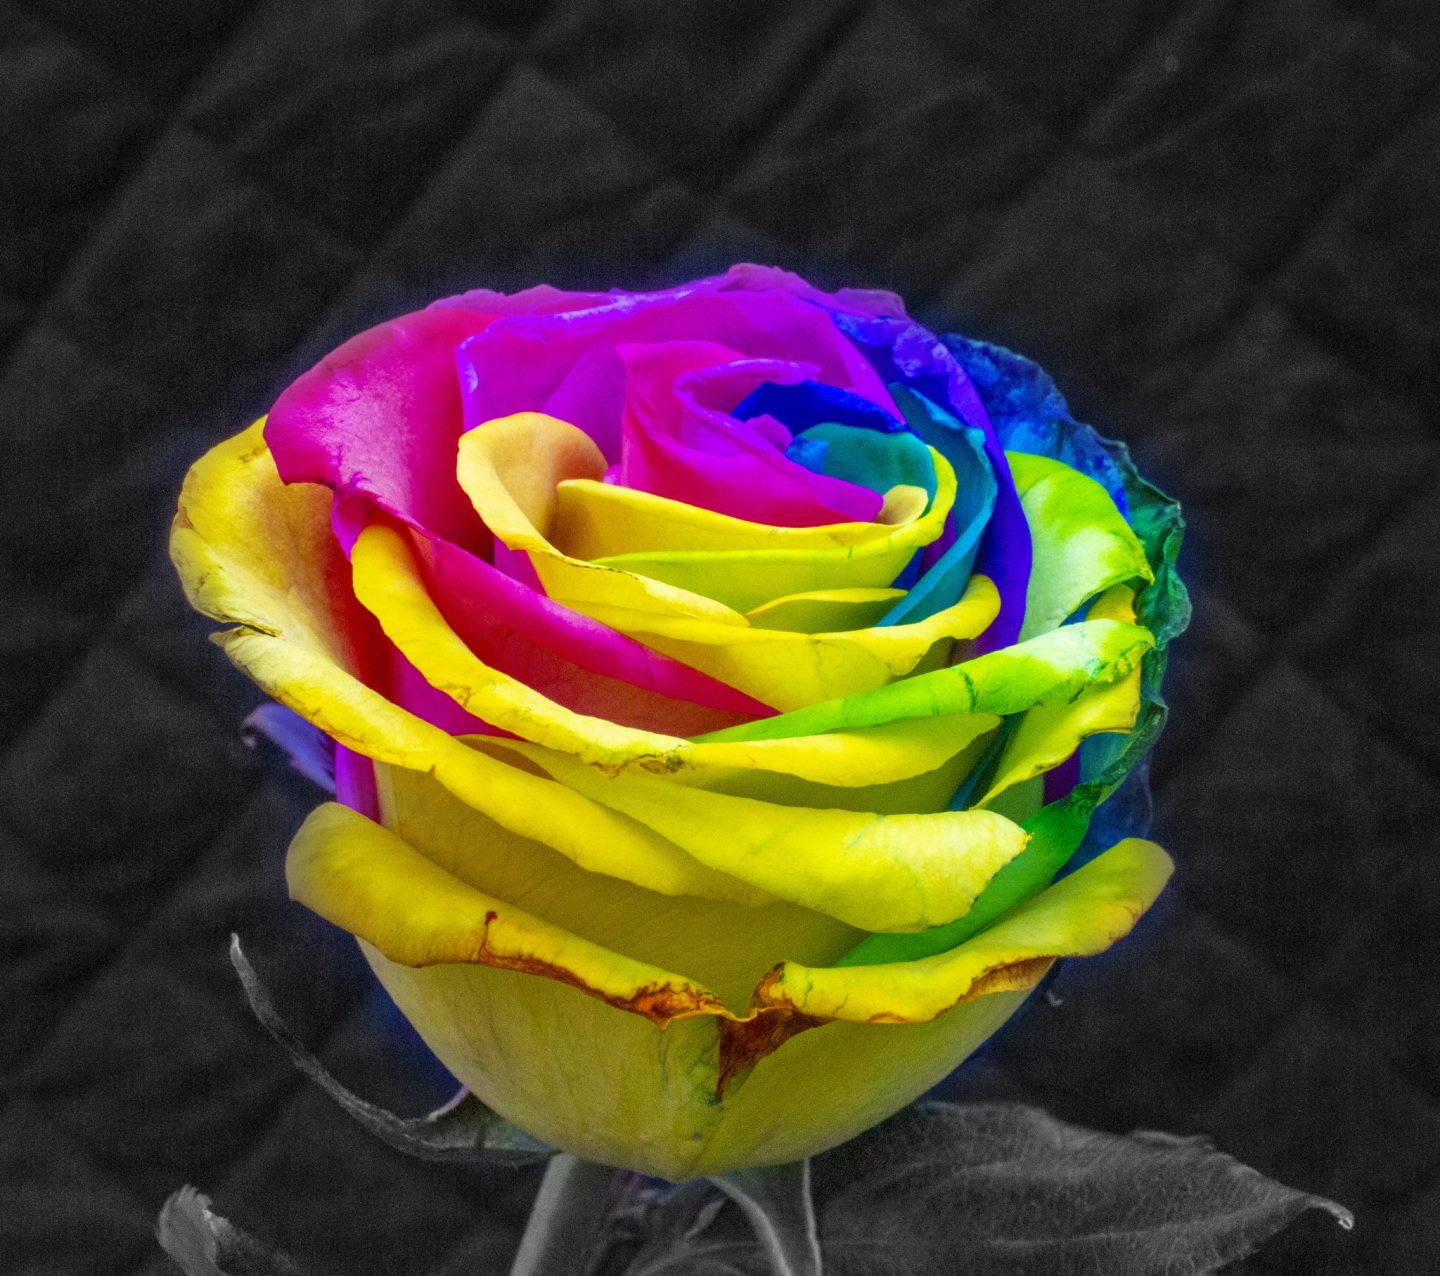 Rainbow rose, rose, Valentine's Day, floral photography, selective colour, flower photography, photography, dad blog, dadbloguk, dadbloguk.com, relationships